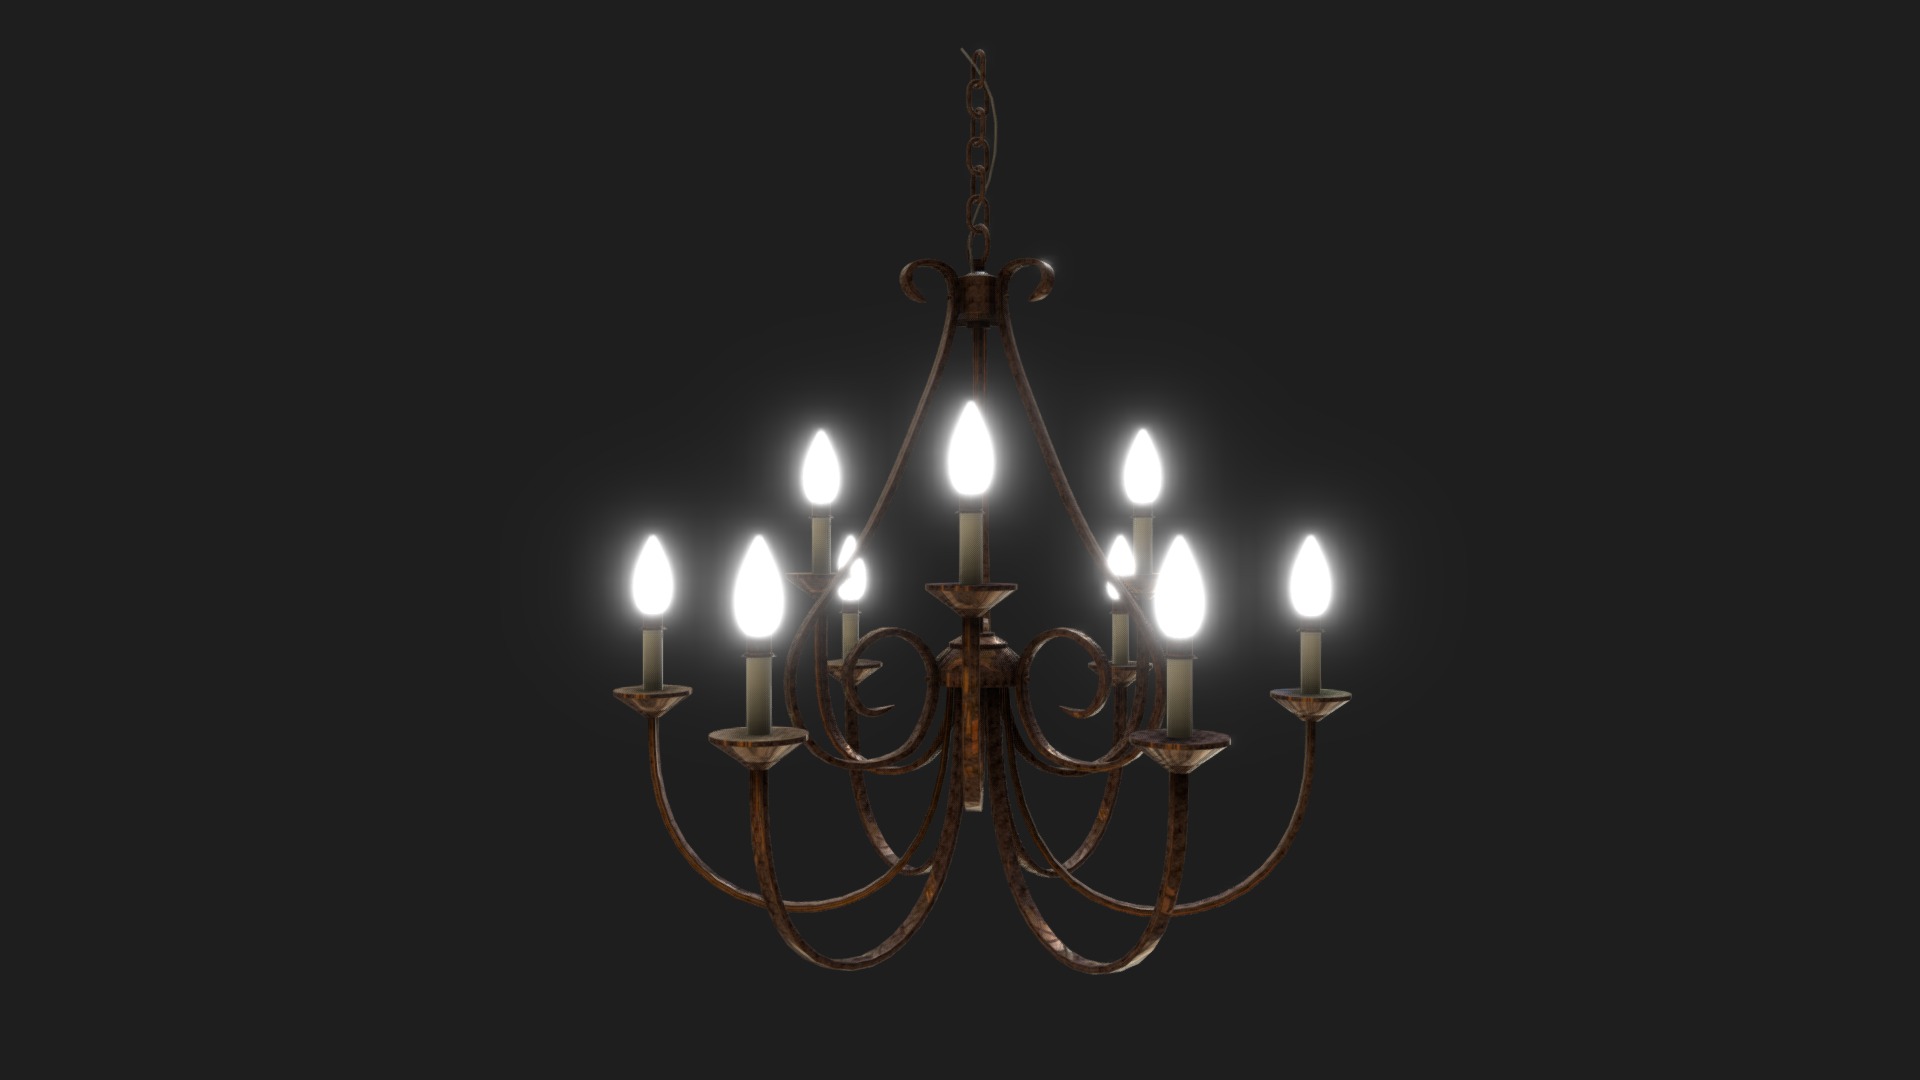 3D model HGPCL-38 - This is a 3D model of the HGPCL-38. The 3D model is about a chandelier with candles.